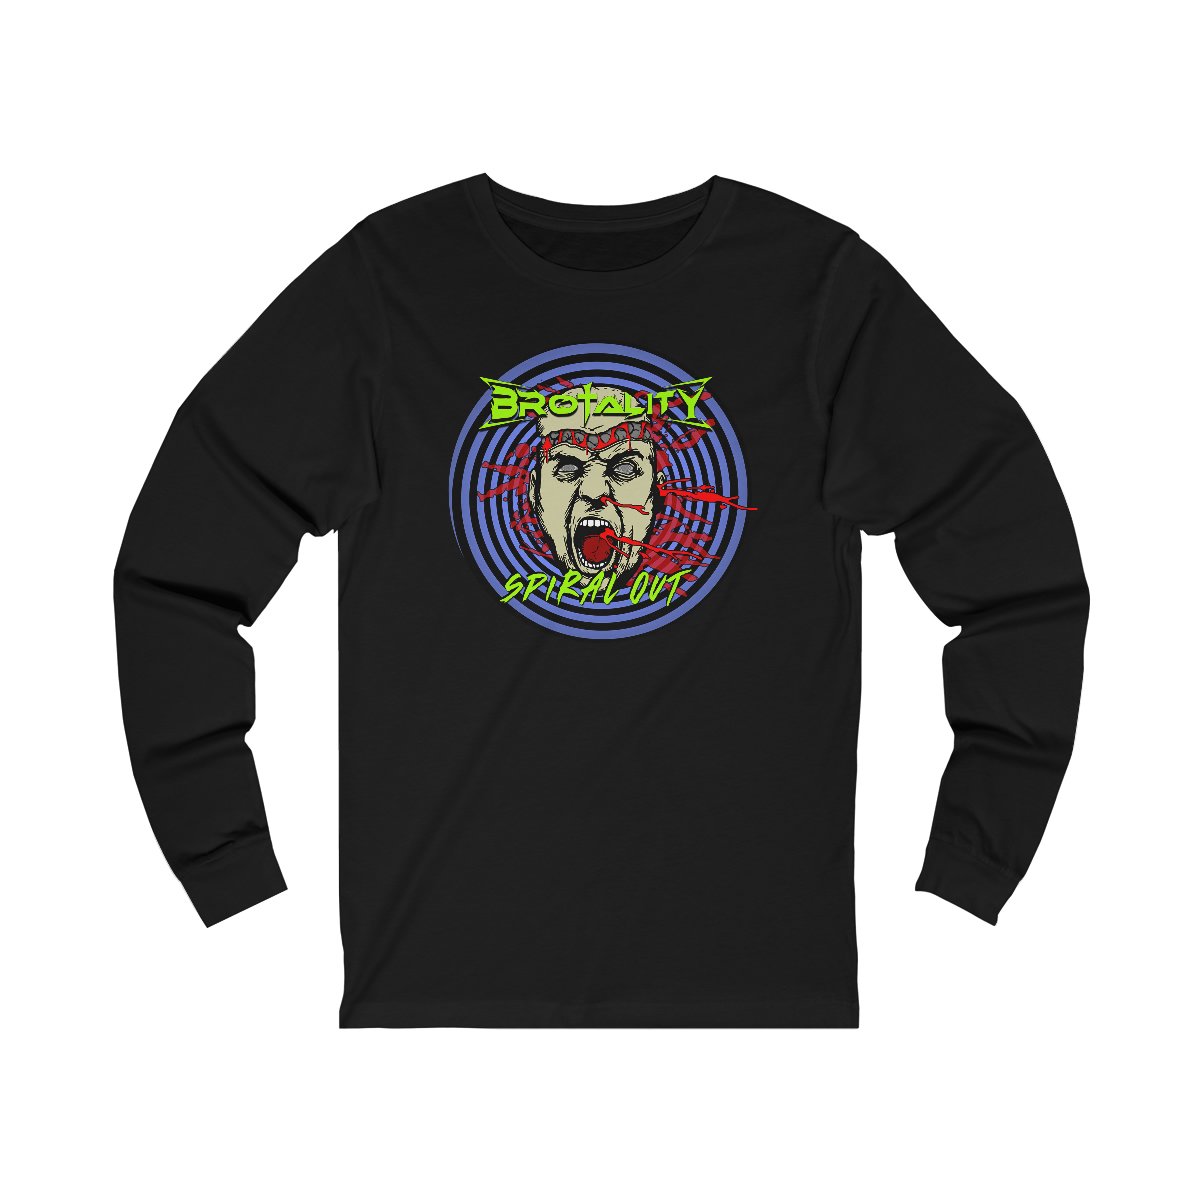 Brotality – Spiral Out Long Sleeve Tshirt